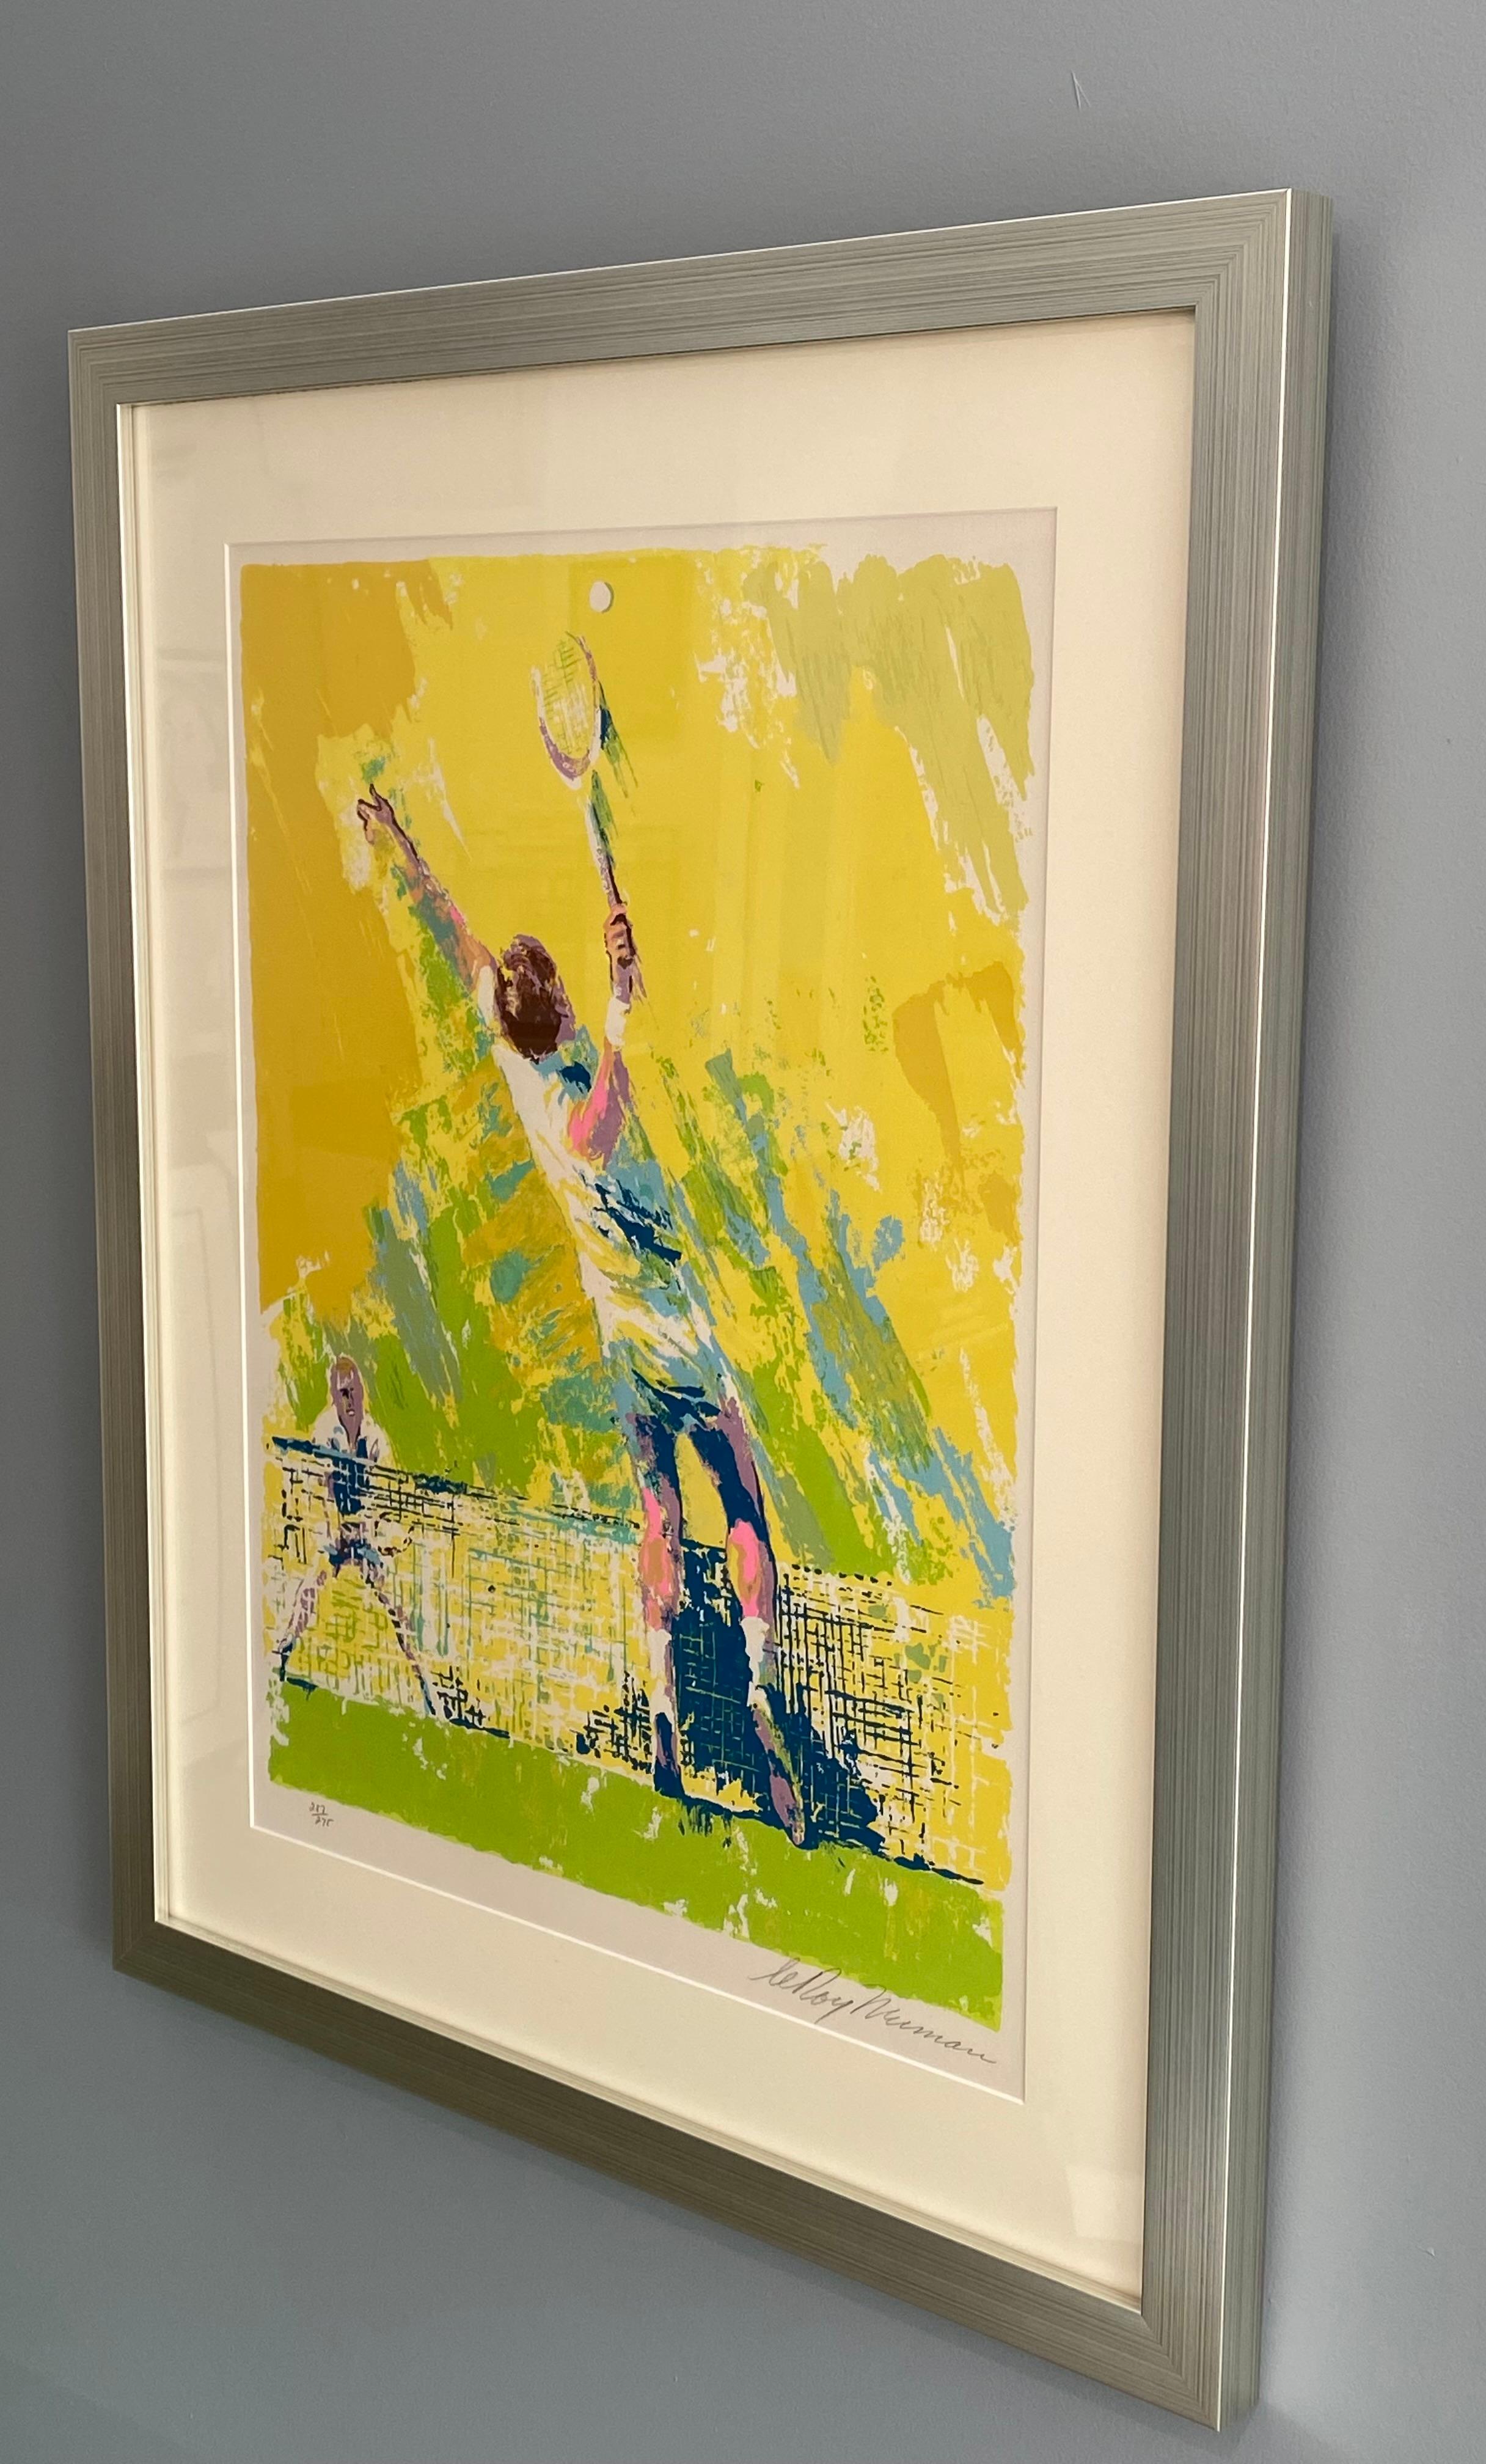 Vintage tennis screen print by artist LeRoy Neiman titled Deuce, and created in 1972. This print is in excellent condition. Image dimensions are 26